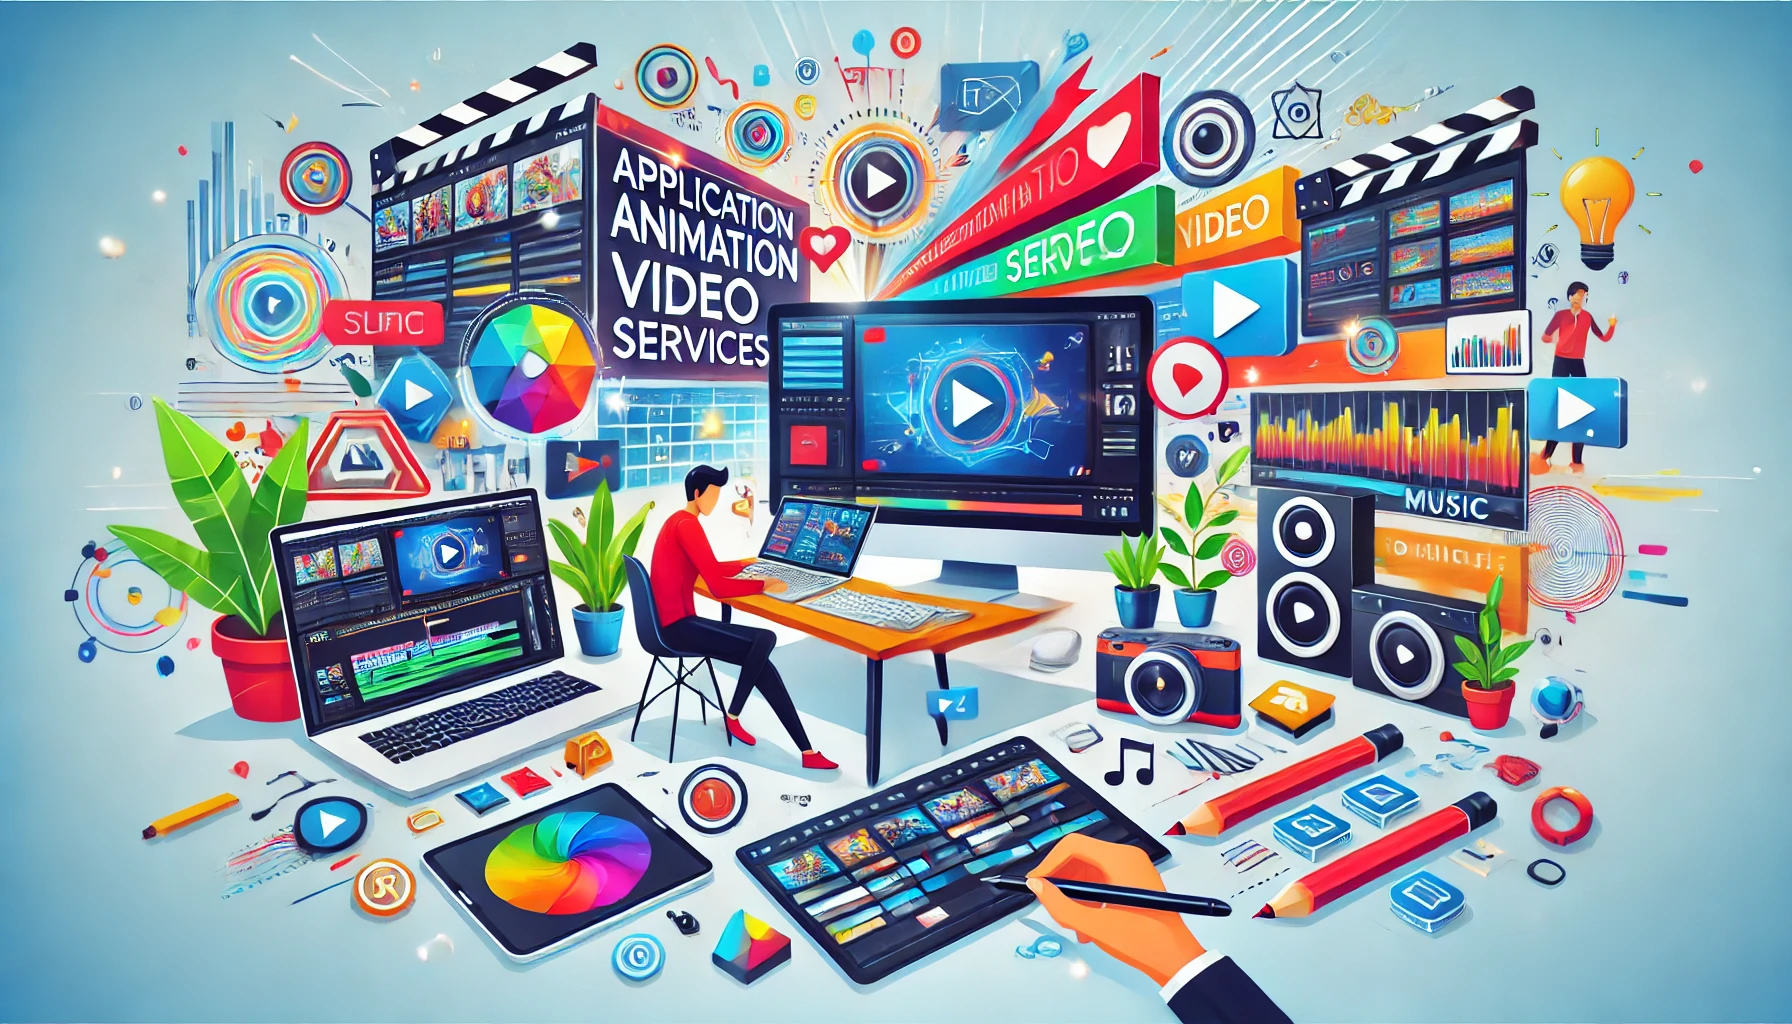 The ROI of Investing in Application Animation Video Services for Enterprise-Level Applications Image